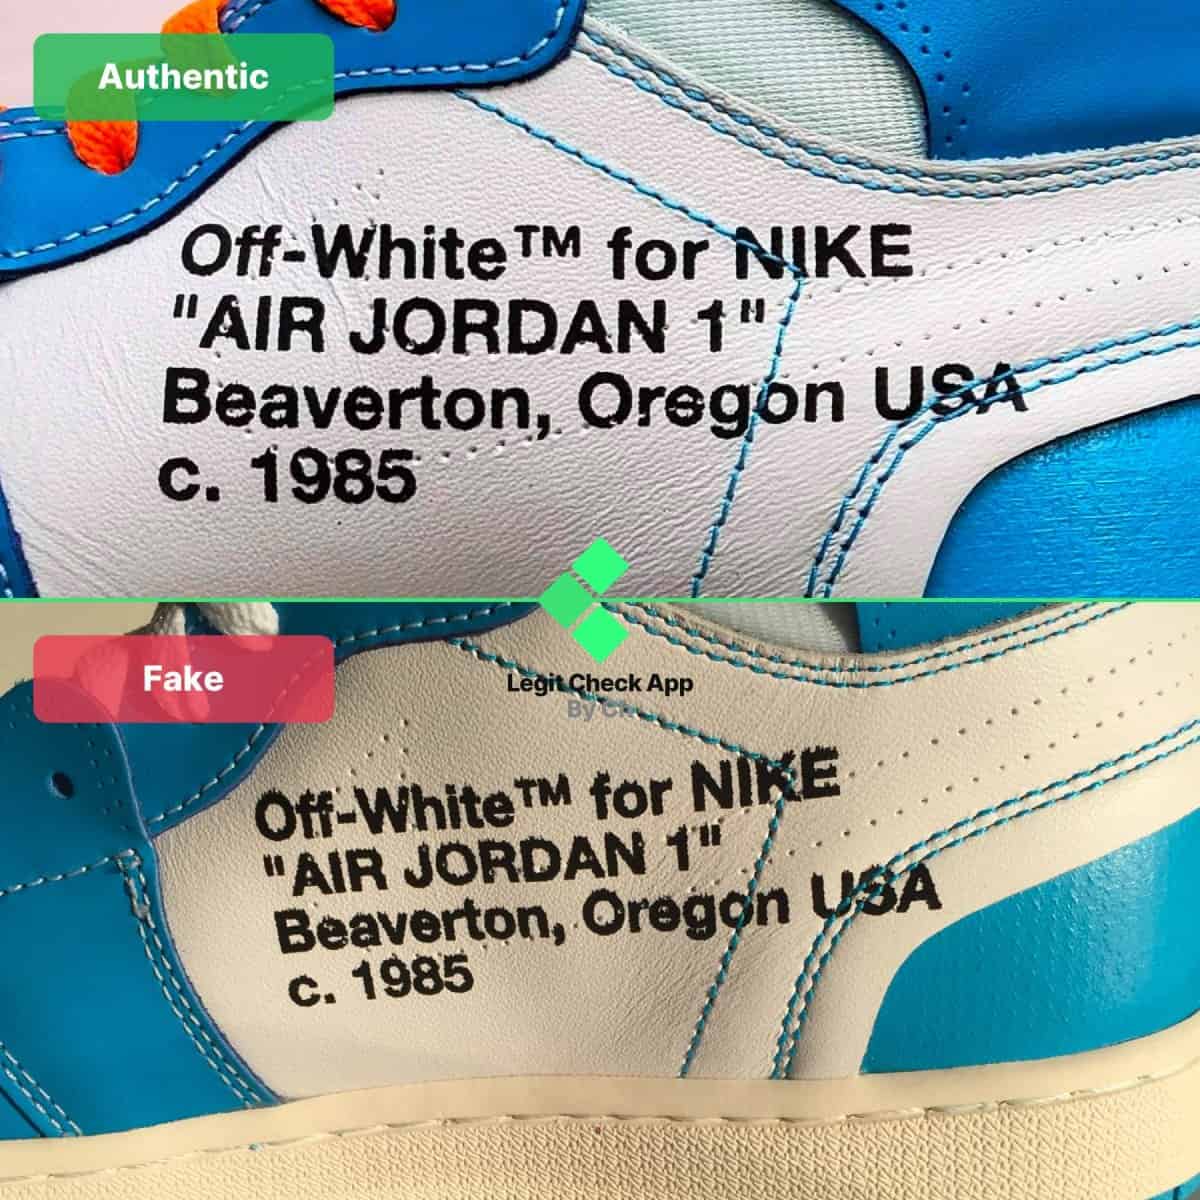 How To Authenticate Off-White Air Jordan 1 UNC